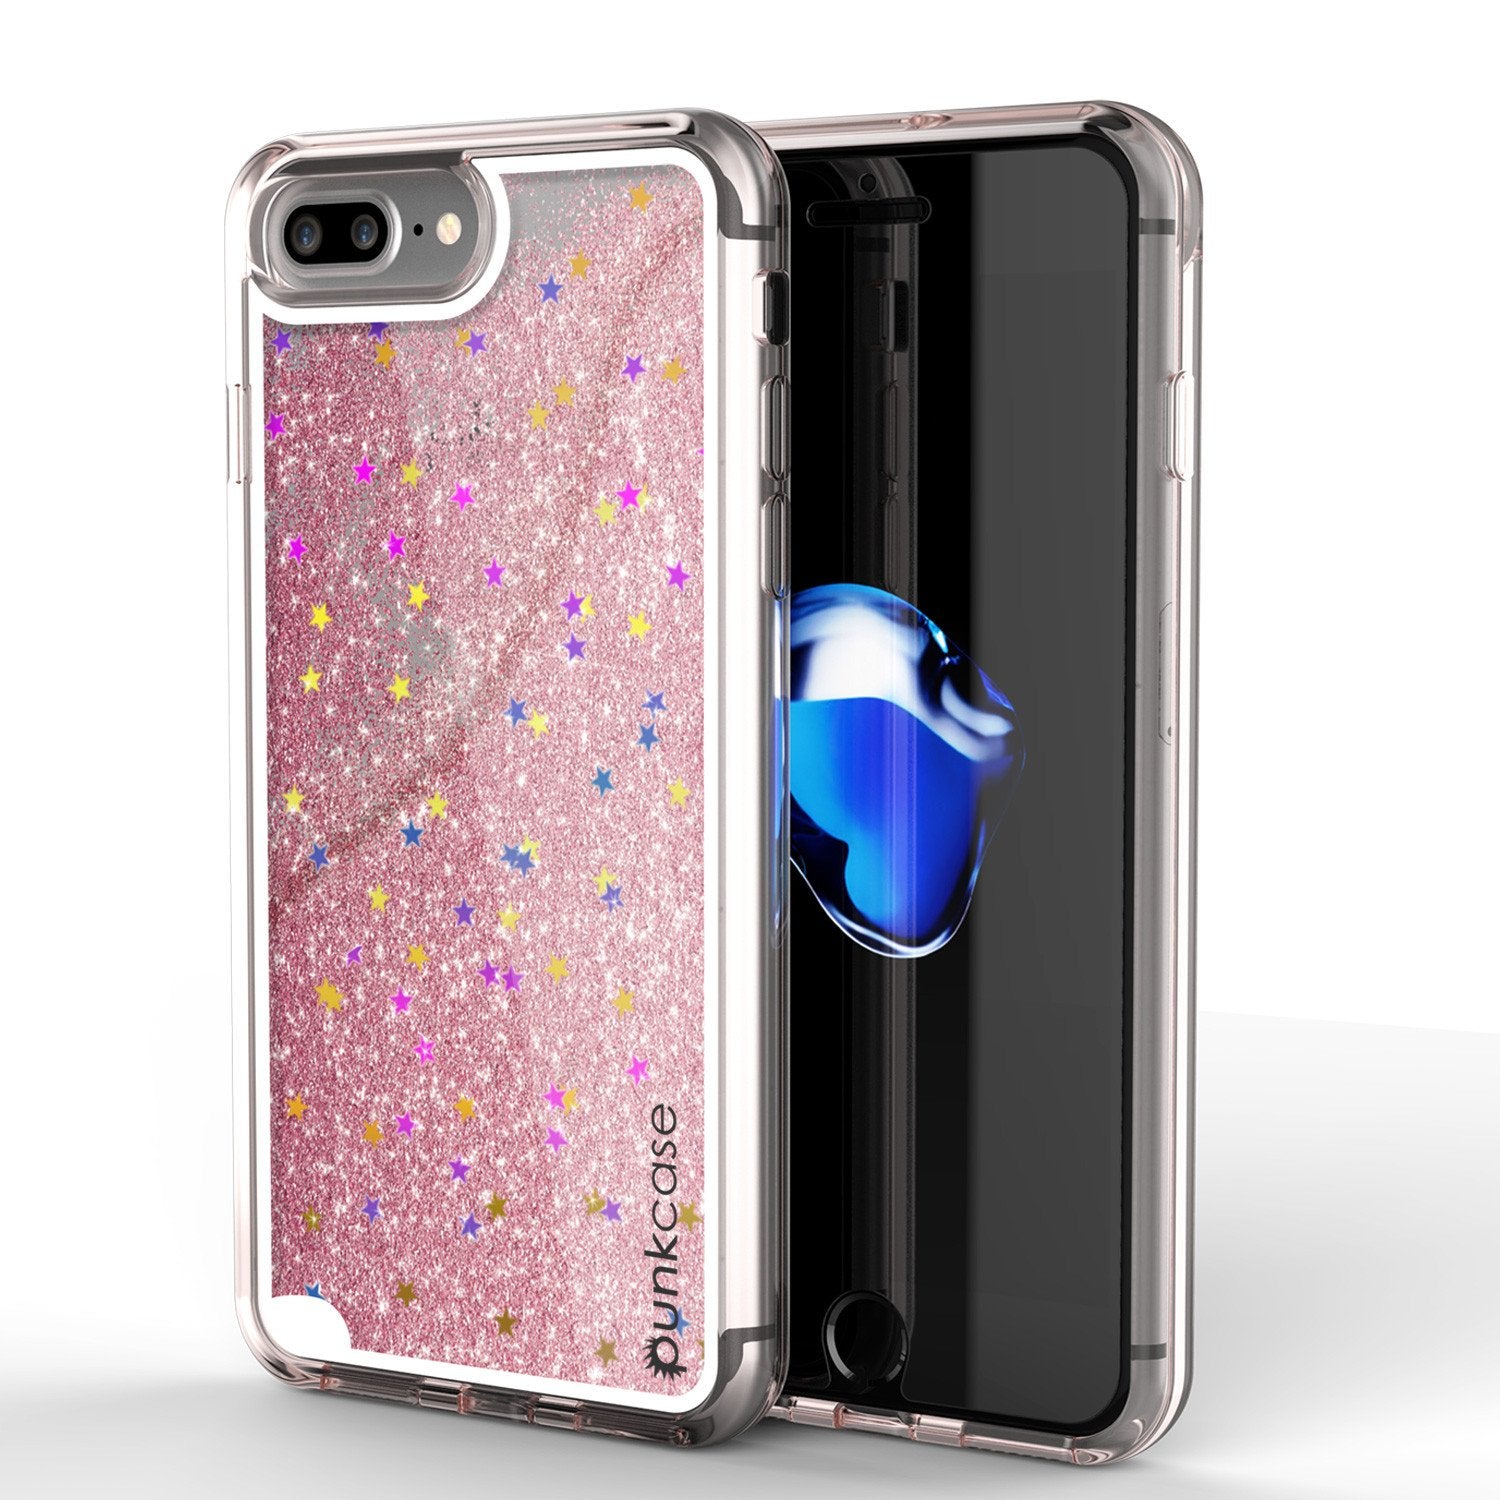 iPhone 7+Plus Case, PunkCase LIQUID Rose Series, Protective Dual Layer Floating Glitter Cover